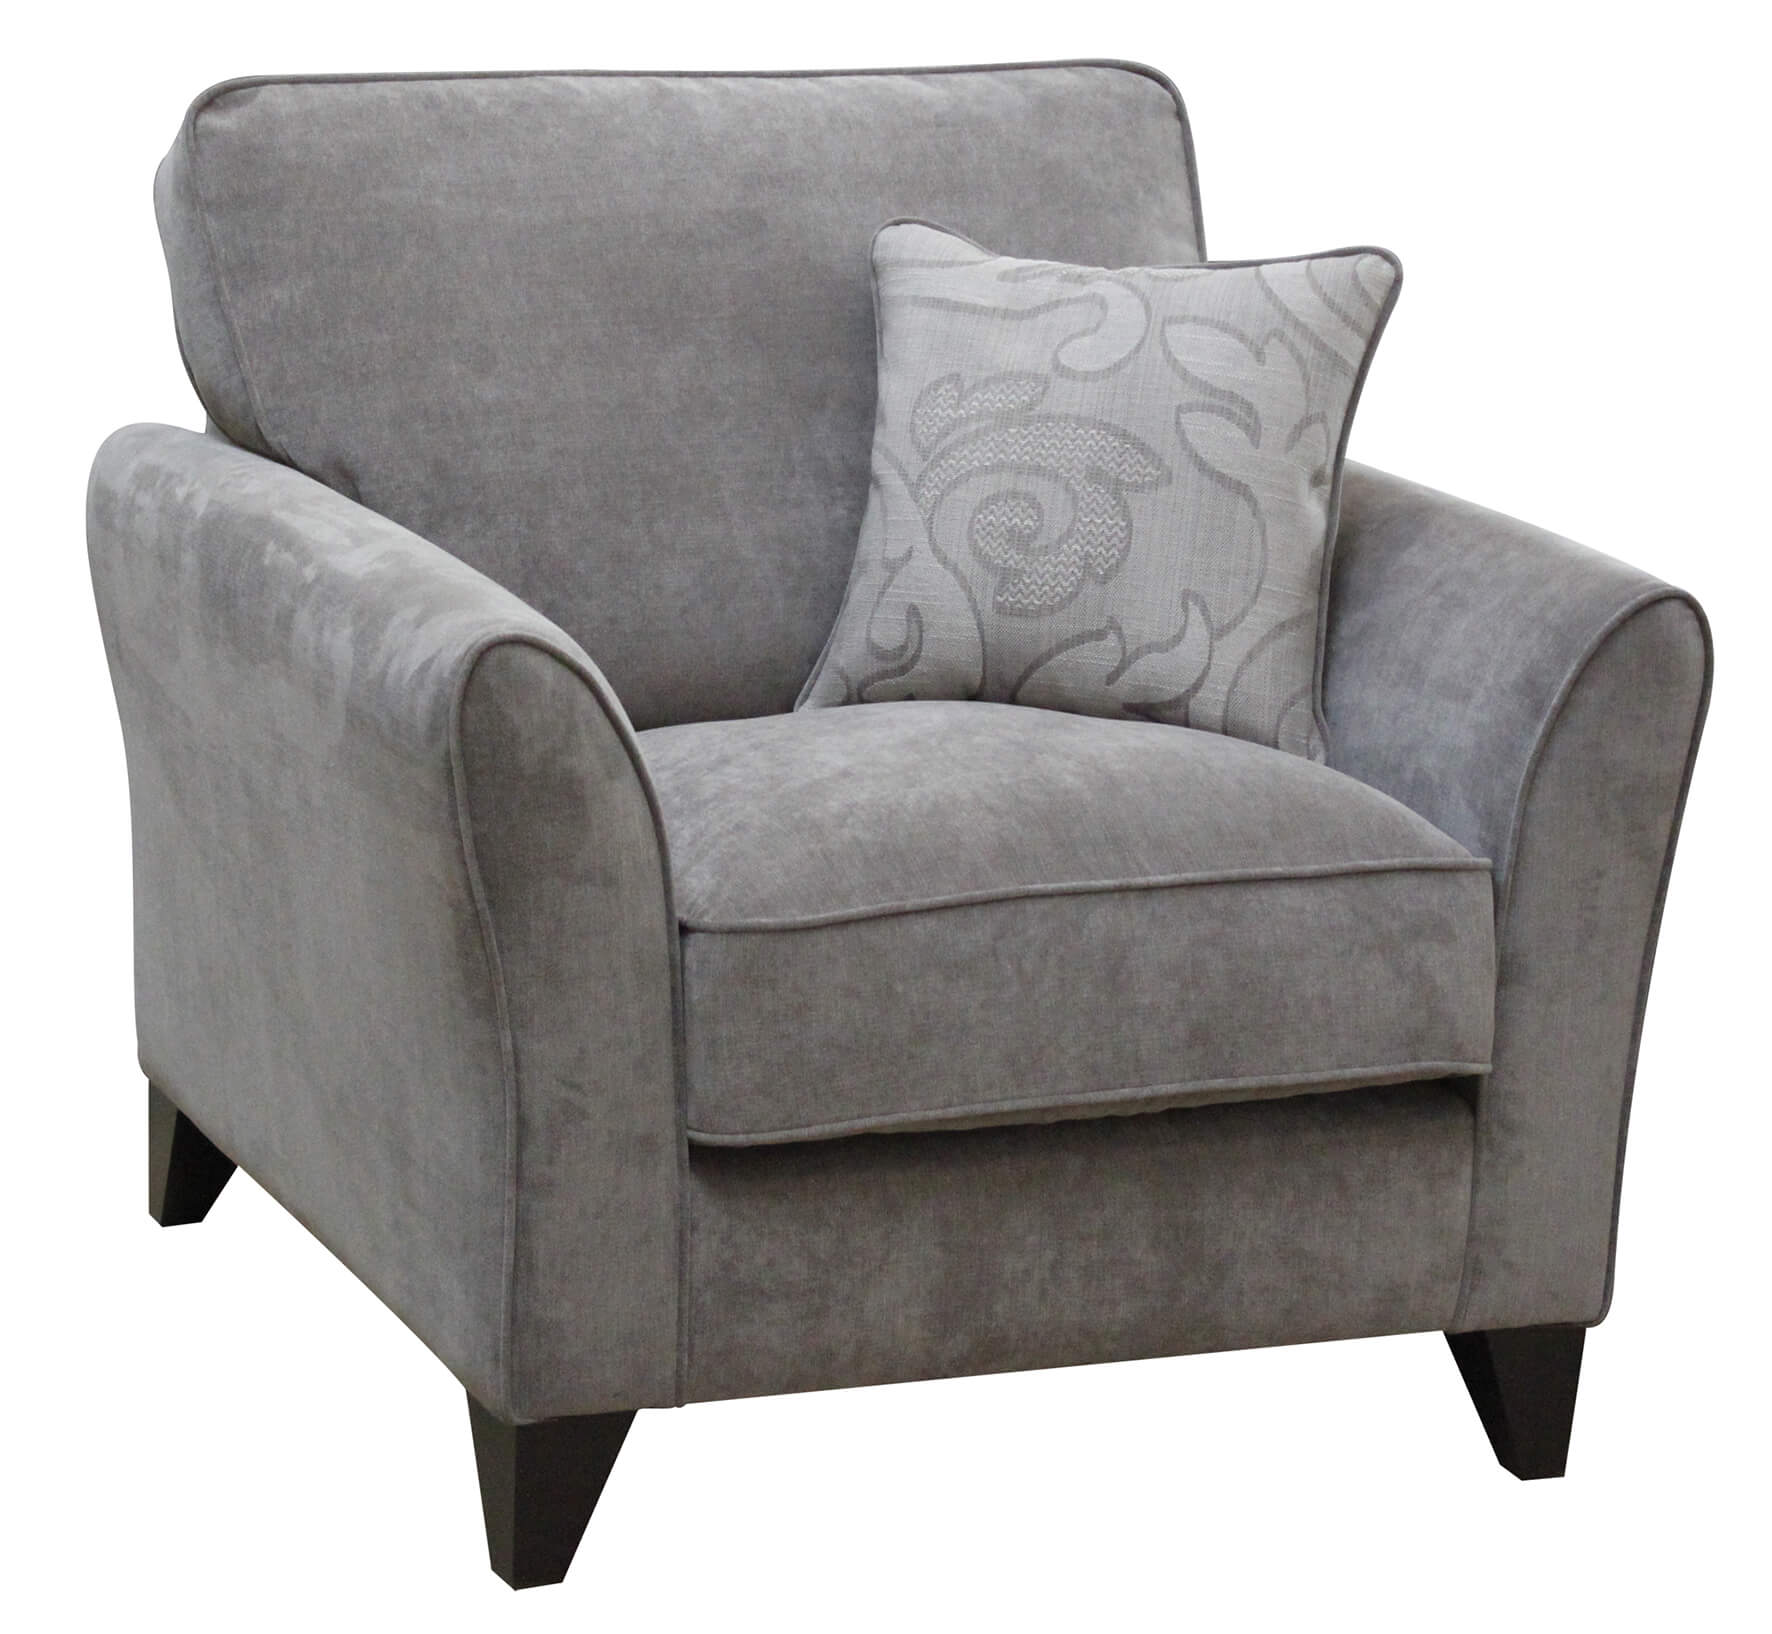 Showing image for Springfield armchair